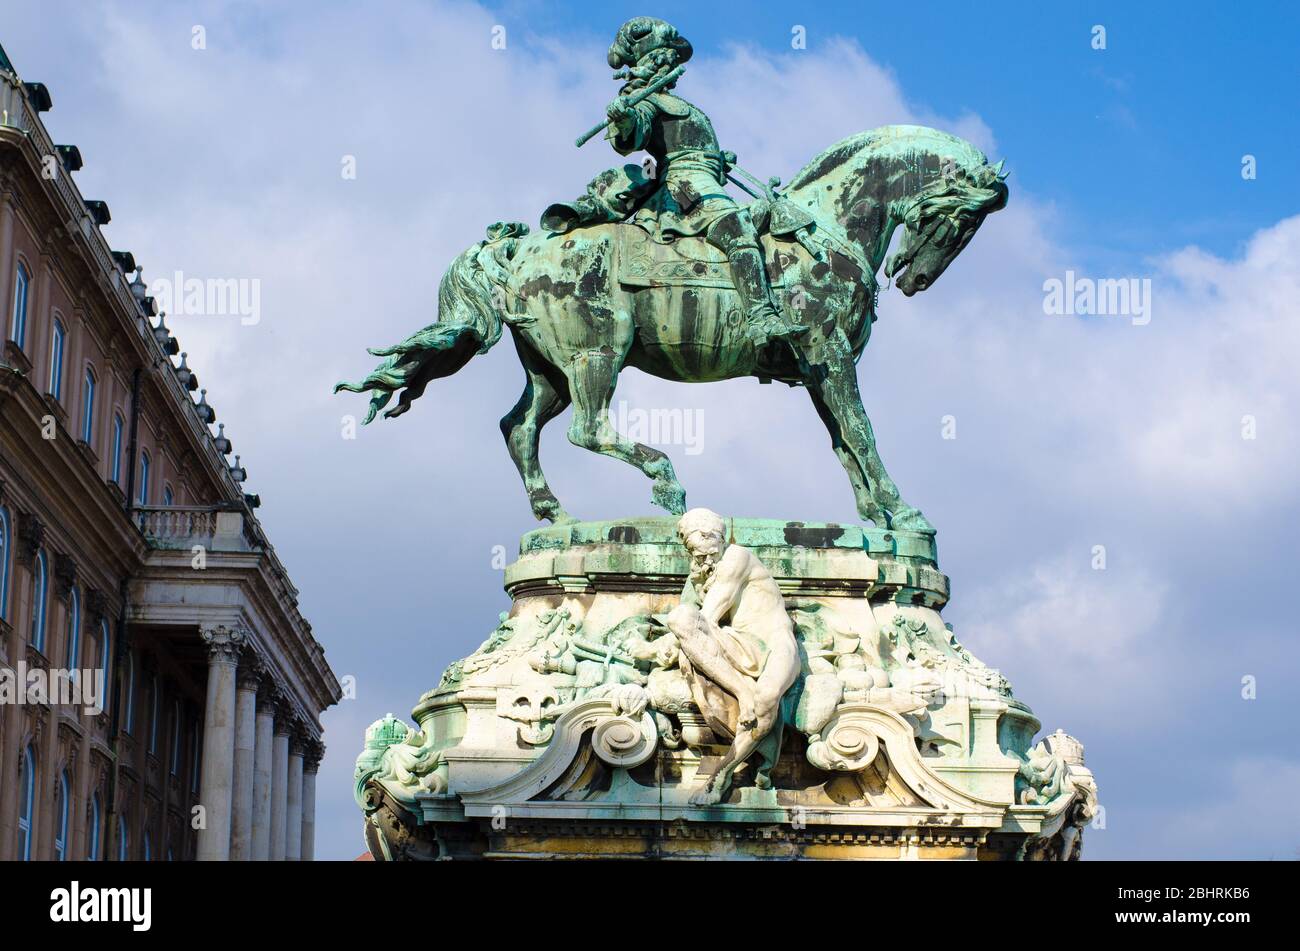 Equestrian statue of Prince Savoyai Eugen in front of the historic Royal Palace in Buda Castle. Budapest, Hungary. Stock Photo